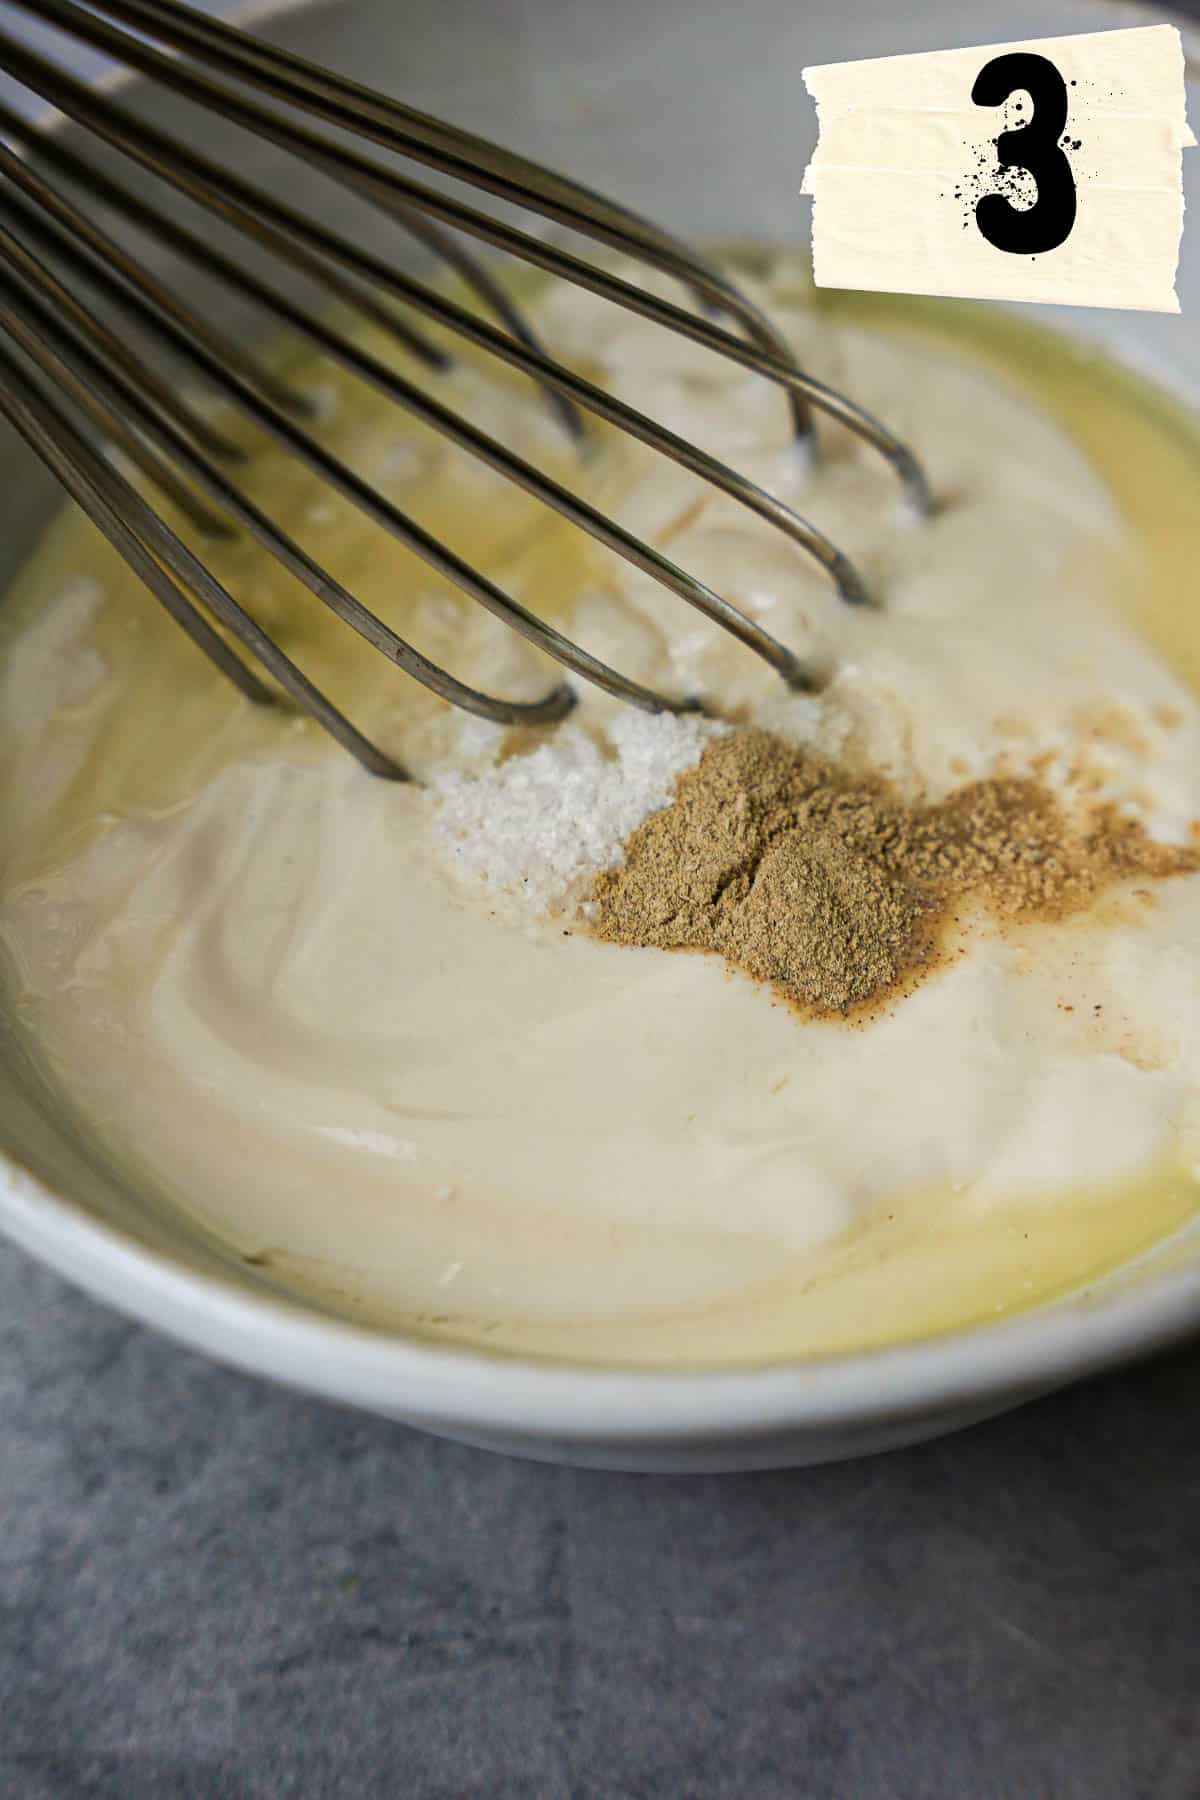 A whisk combines yogurt and other ingredients in a white ceramic bowl.